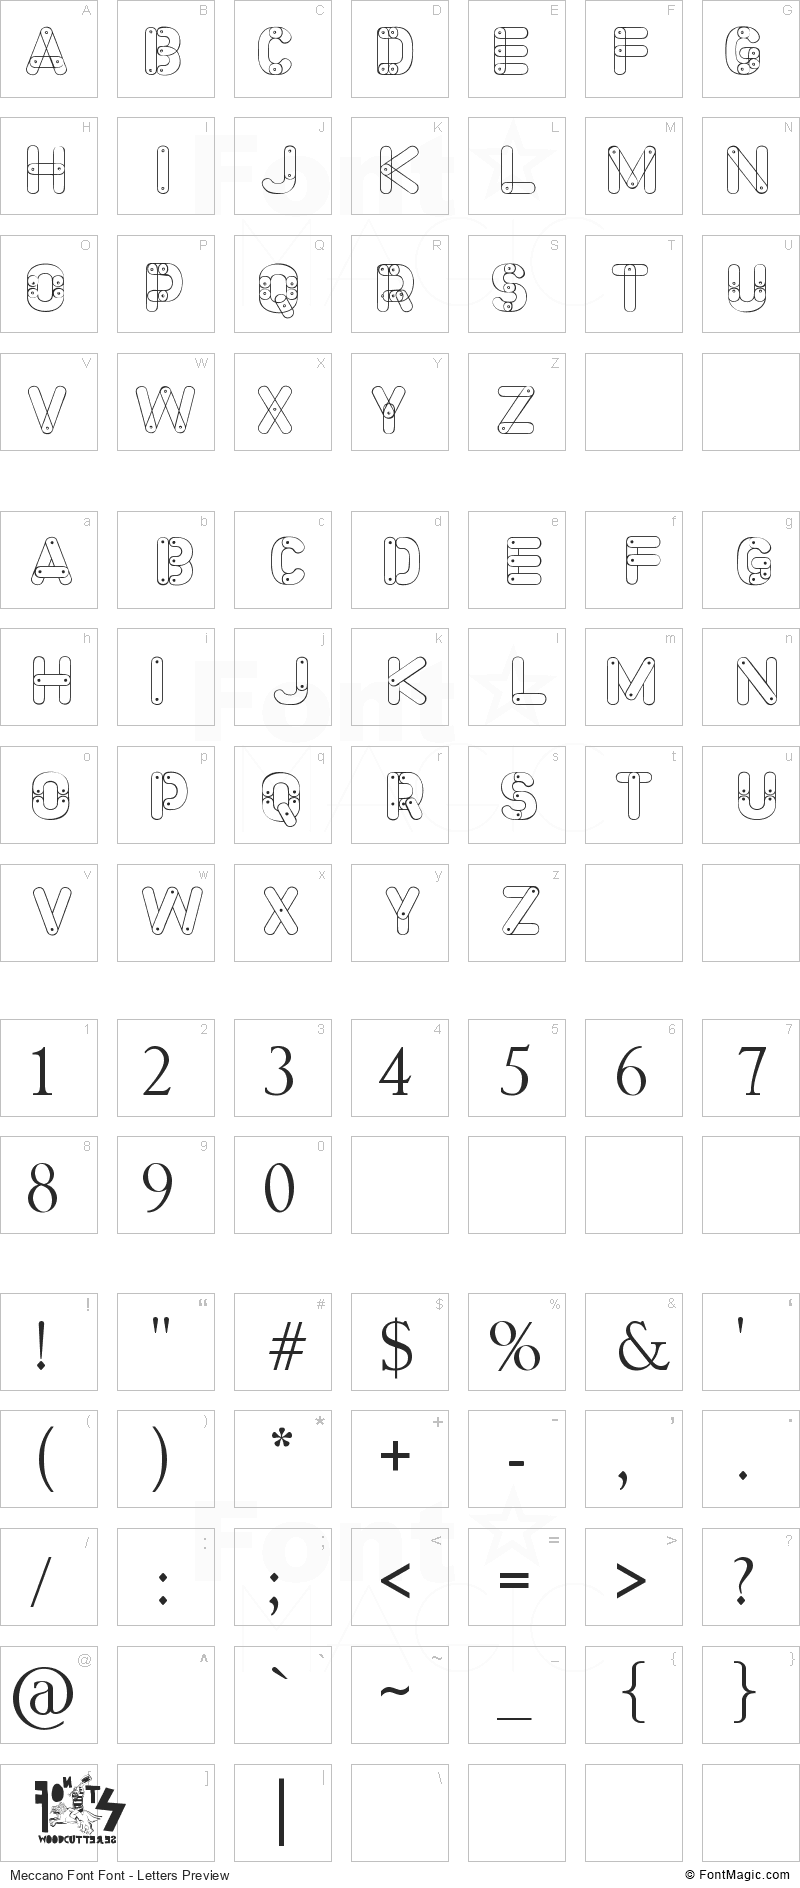 Meccano Font Font - All Latters Preview Chart